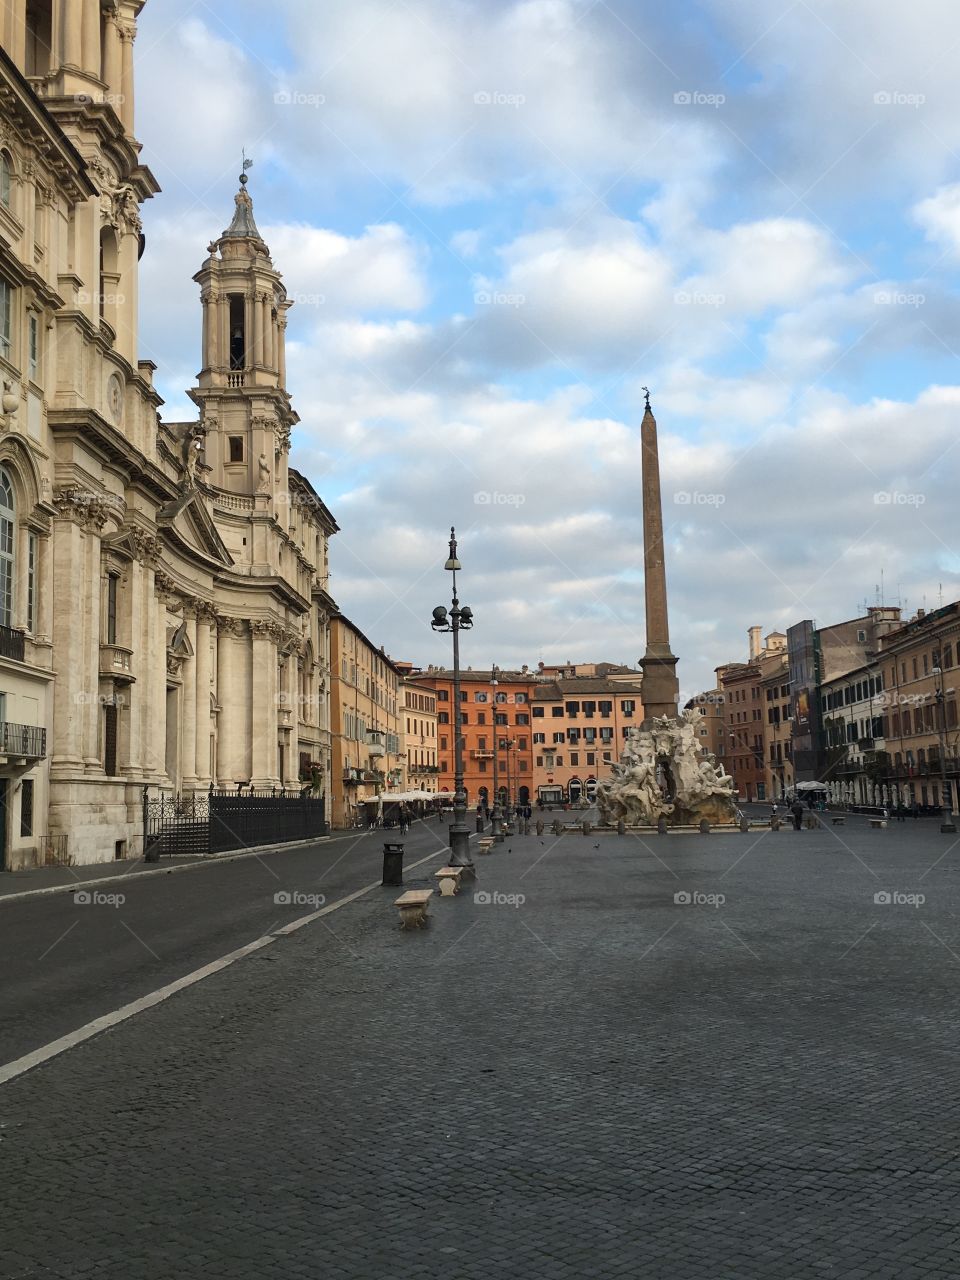 View of Piazza Navona, Rome,Italy